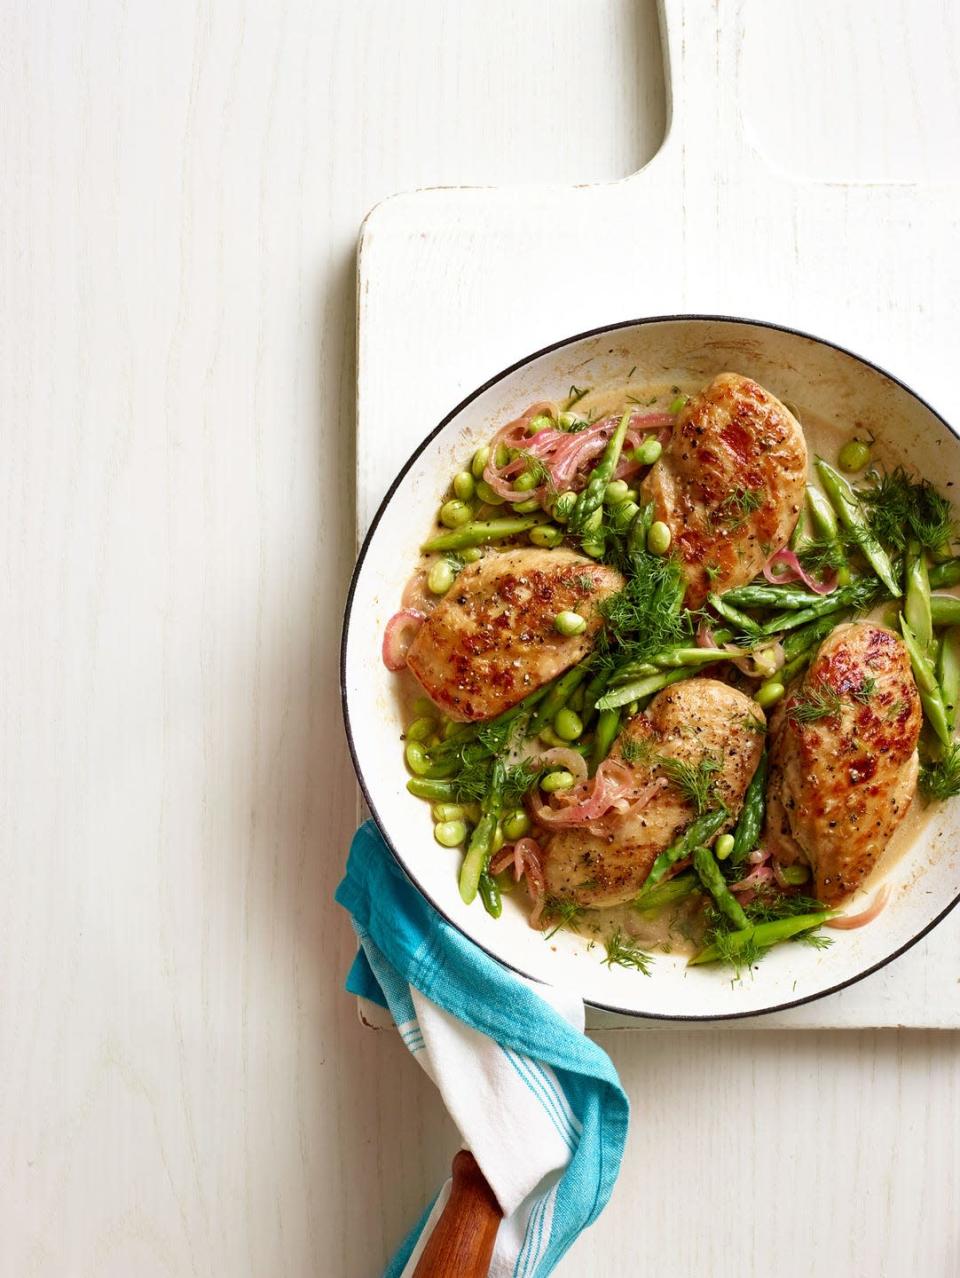 <p>Bright green spring vegetables and fresh herbs are the perfect way to liven up basic chicken breasts for spring.</p><p><strong><a href="https://www.womansday.com/food-recipes/food-drinks/recipes/a13179/one-pan-spring-chicken-asparagus-edamame-recipe-wdy0414/" rel="nofollow noopener" target="_blank" data-ylk="slk:Get the recipe for One-Pan Spring Chicken with Asparagus and Edamame." class="link ">Get the recipe for One-Pan Spring Chicken with Asparagus and Edamame.</a></strong></p>